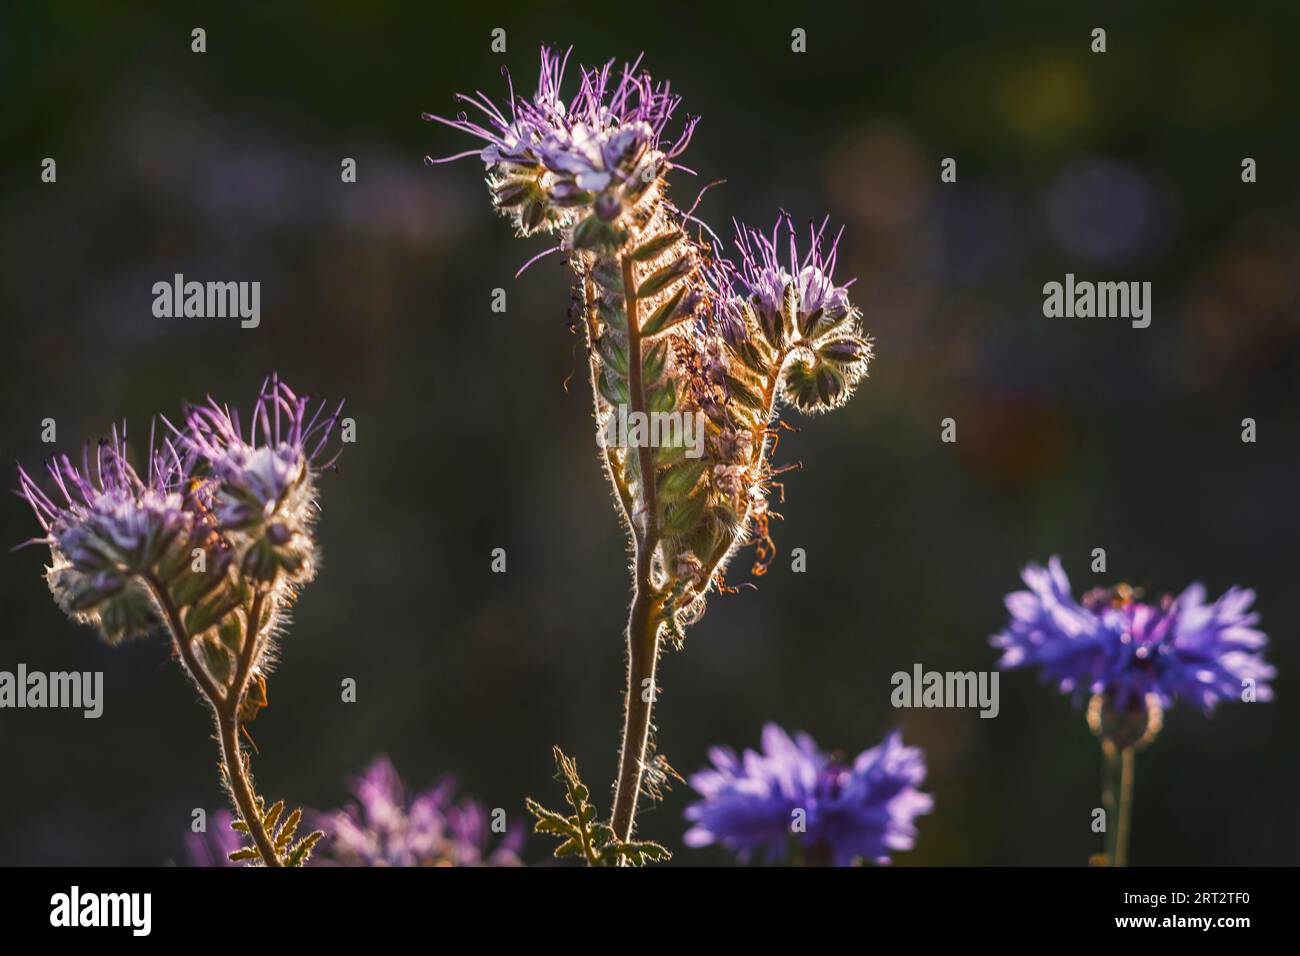 The tansy (phacelia), also called tussock beauty (Phacelia), is a plant species from the genus in the family of broadleaf plants. It is an important Stock Photo